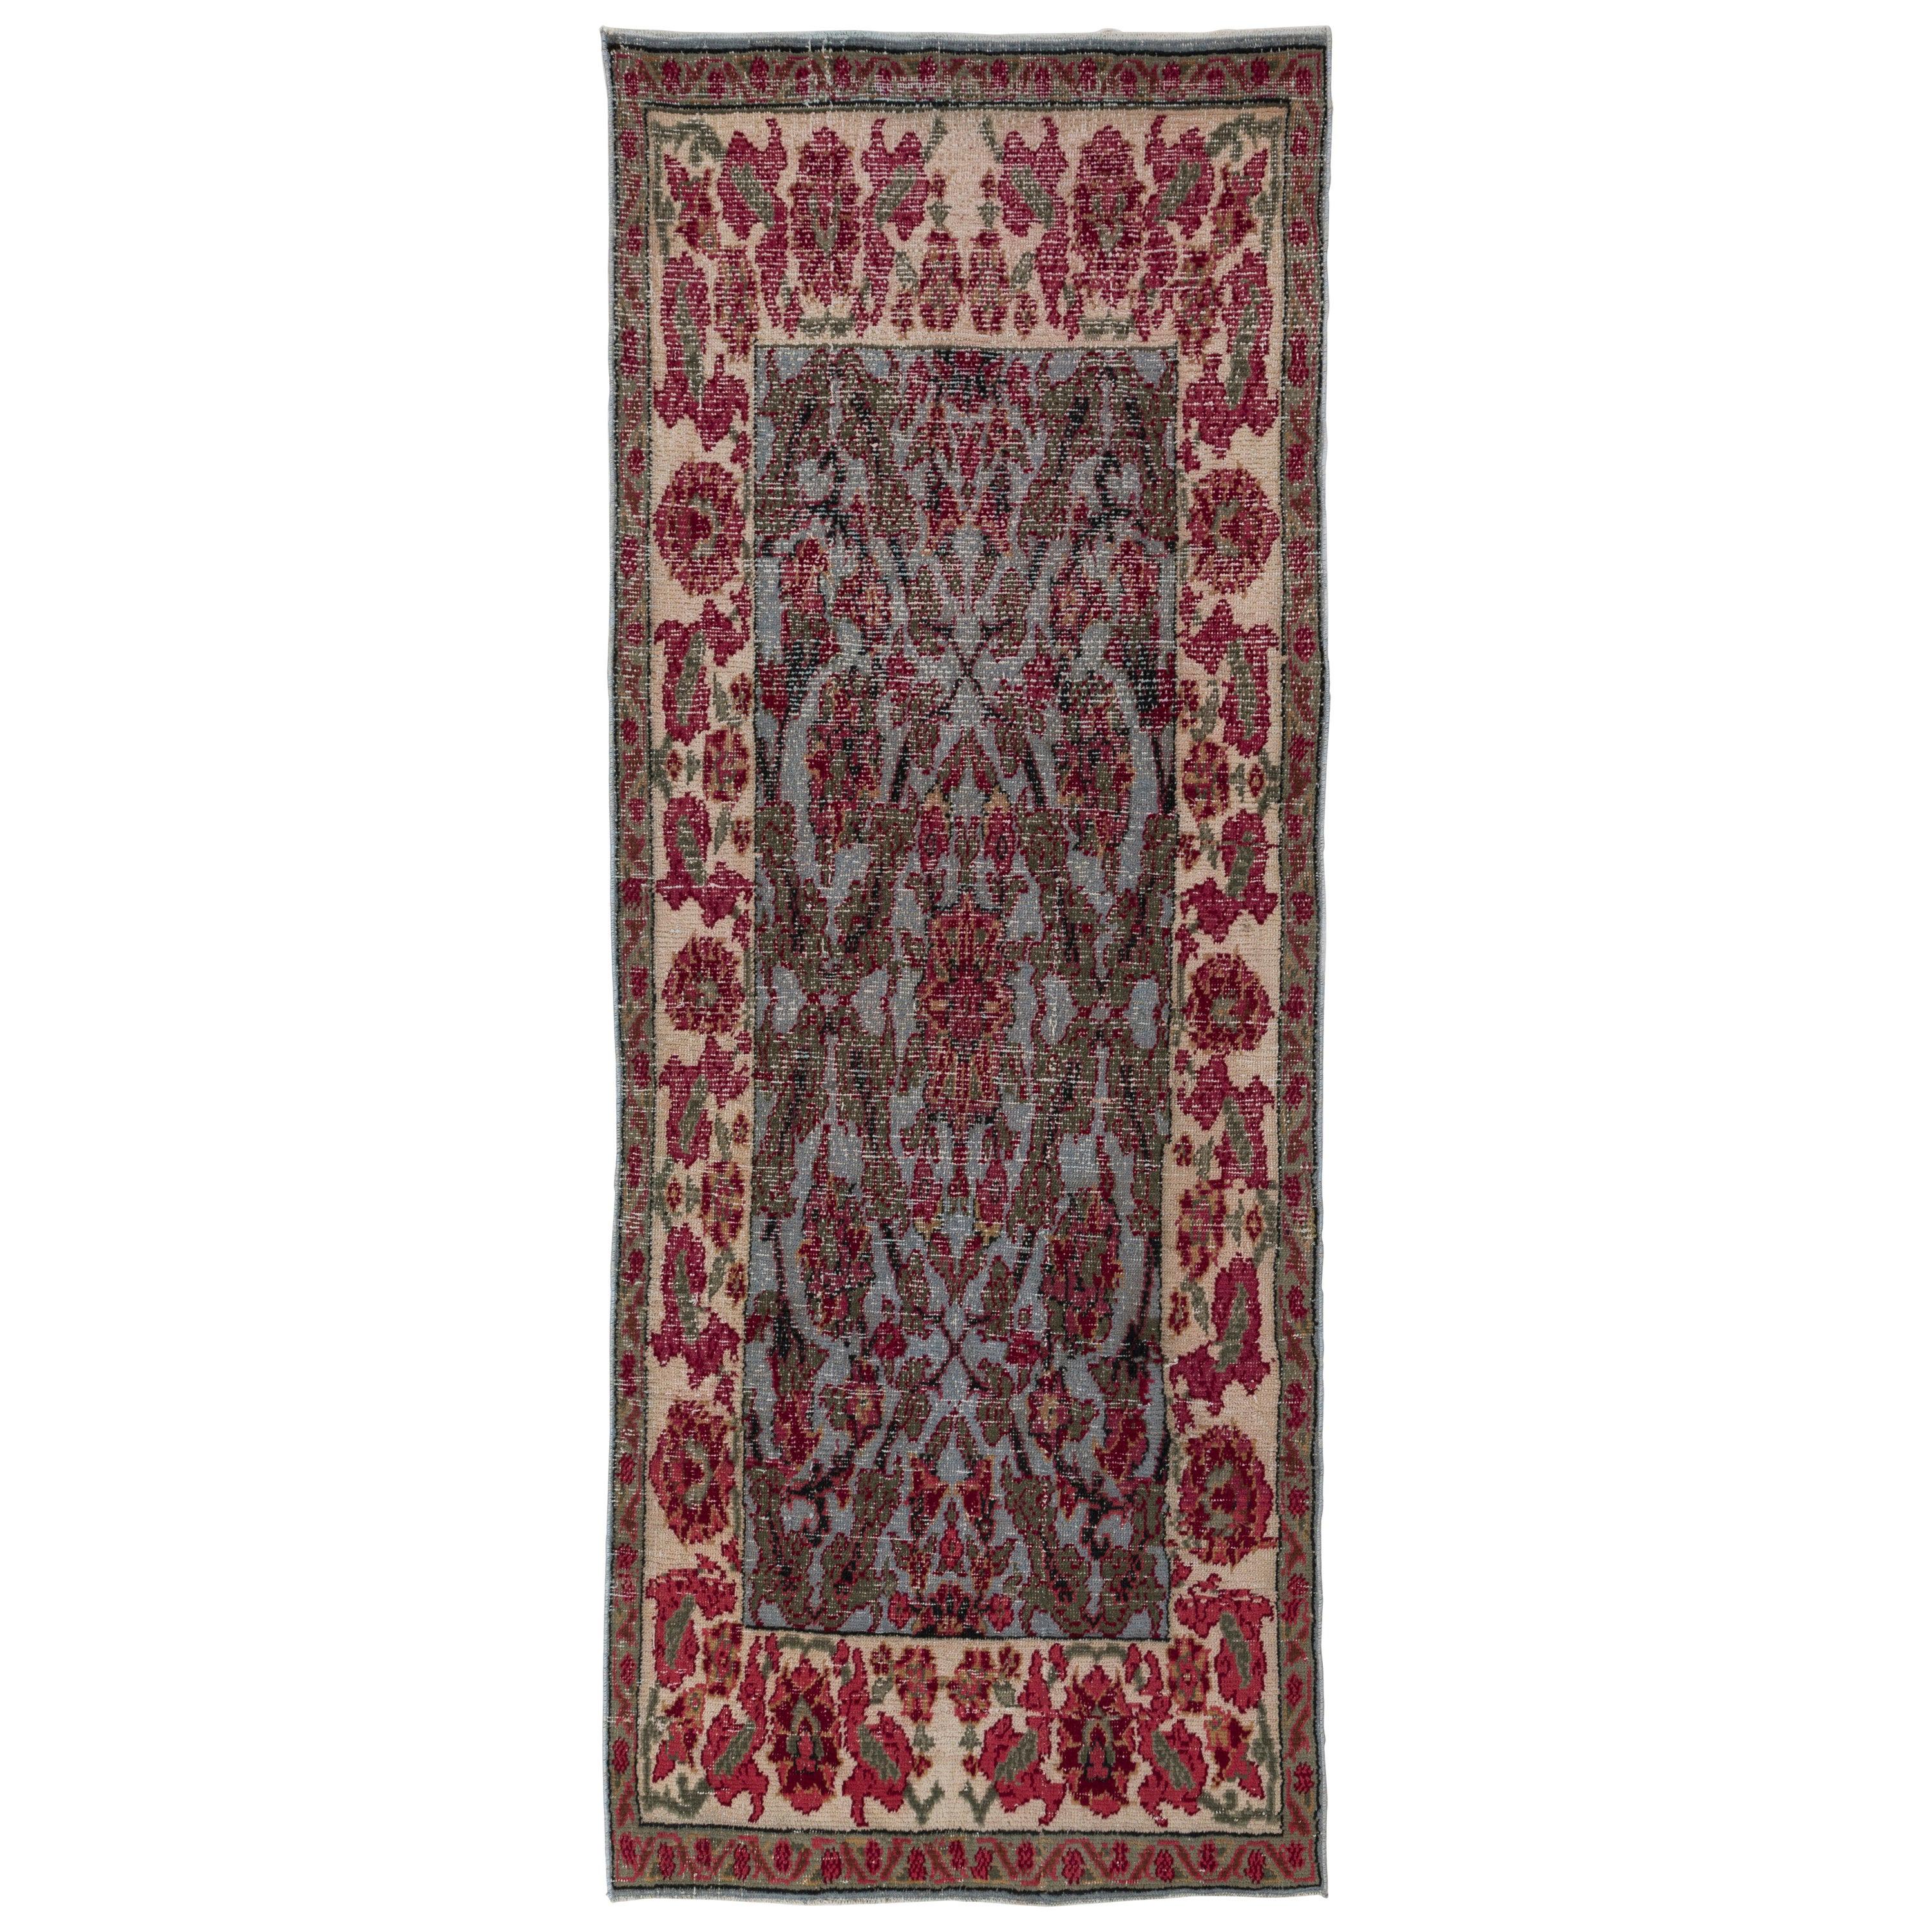 3.3x8.2 Ft Unusual MidCentury Hand-Made Anatolian Rug with Floral Garden Design For Sale